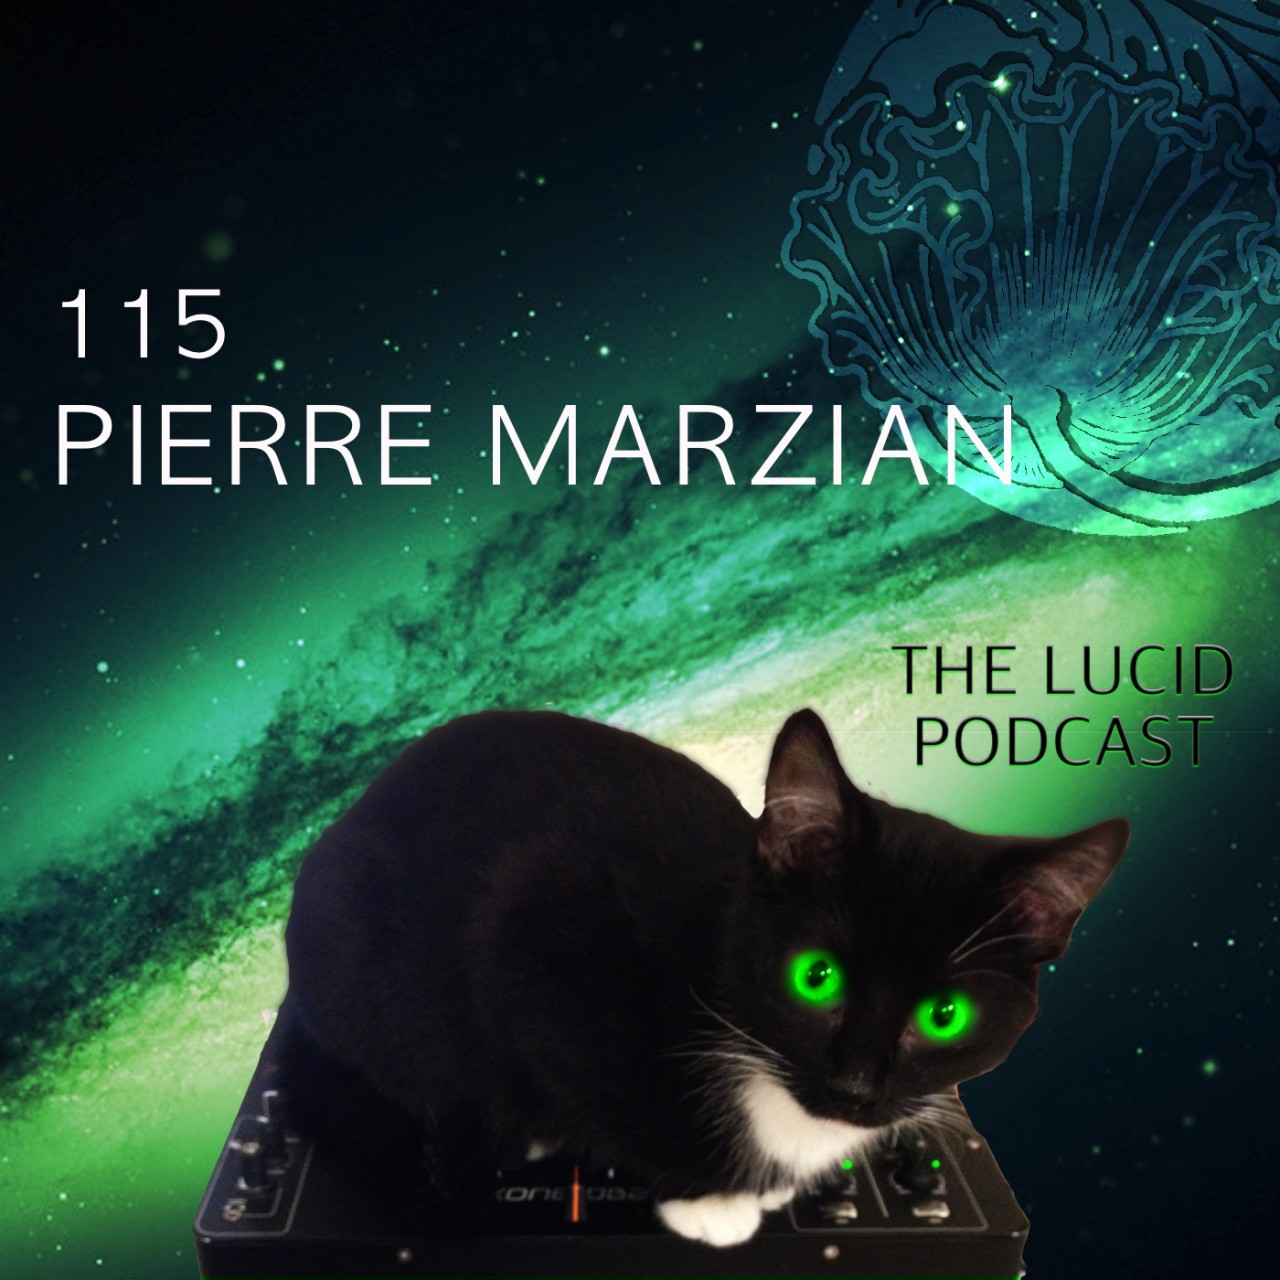 The Lucid Podcast 115 Pierre Marzian